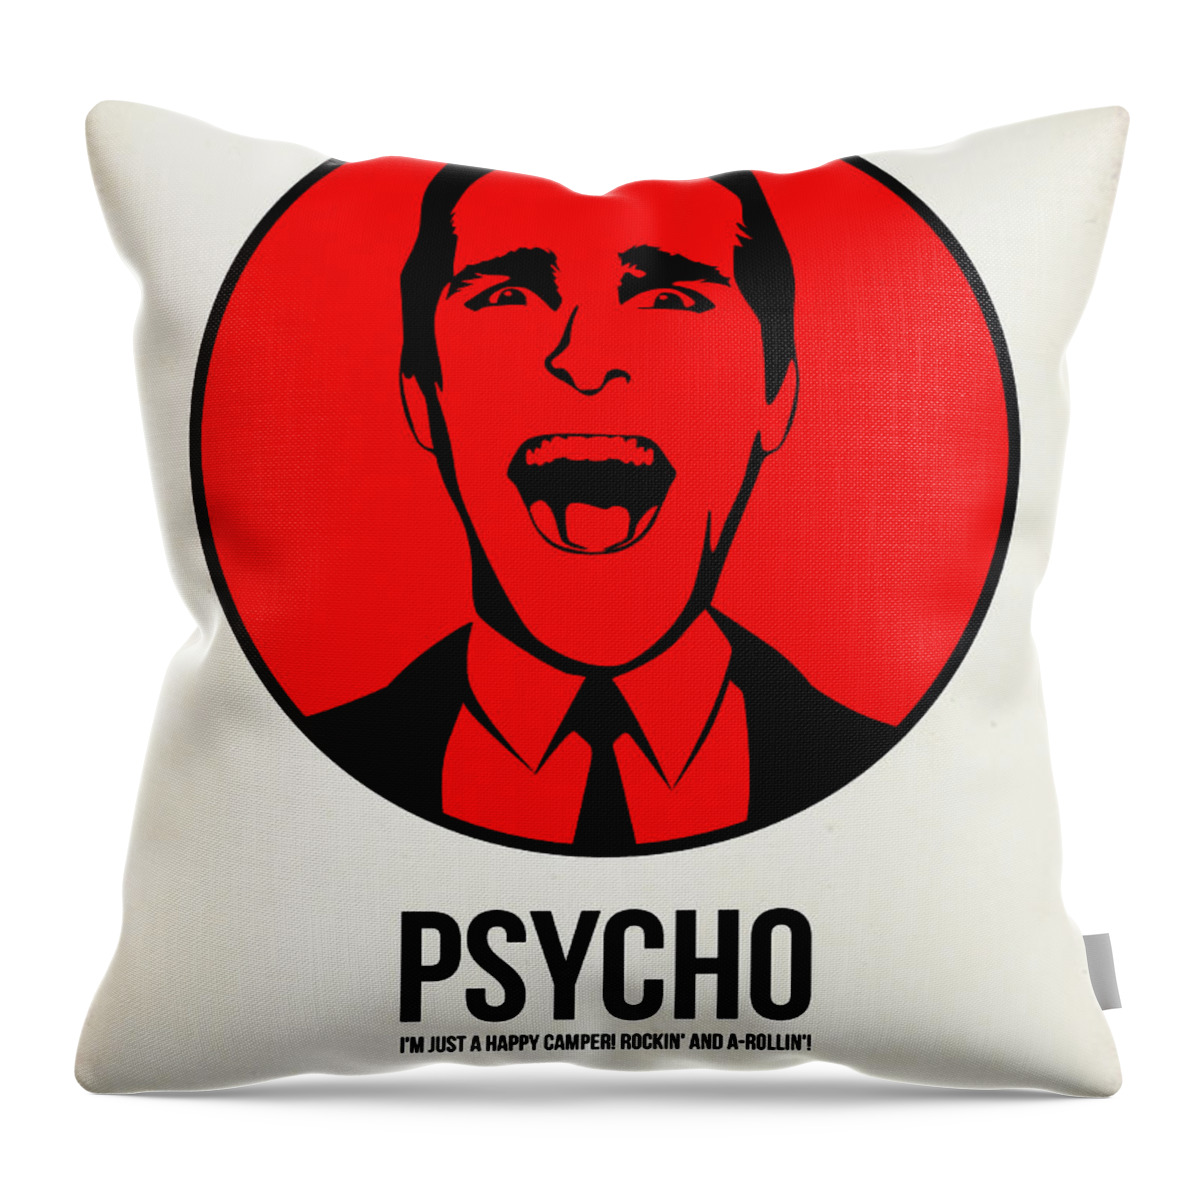 Movie Throw Pillow featuring the digital art Psycho Poster 2 by Naxart Studio